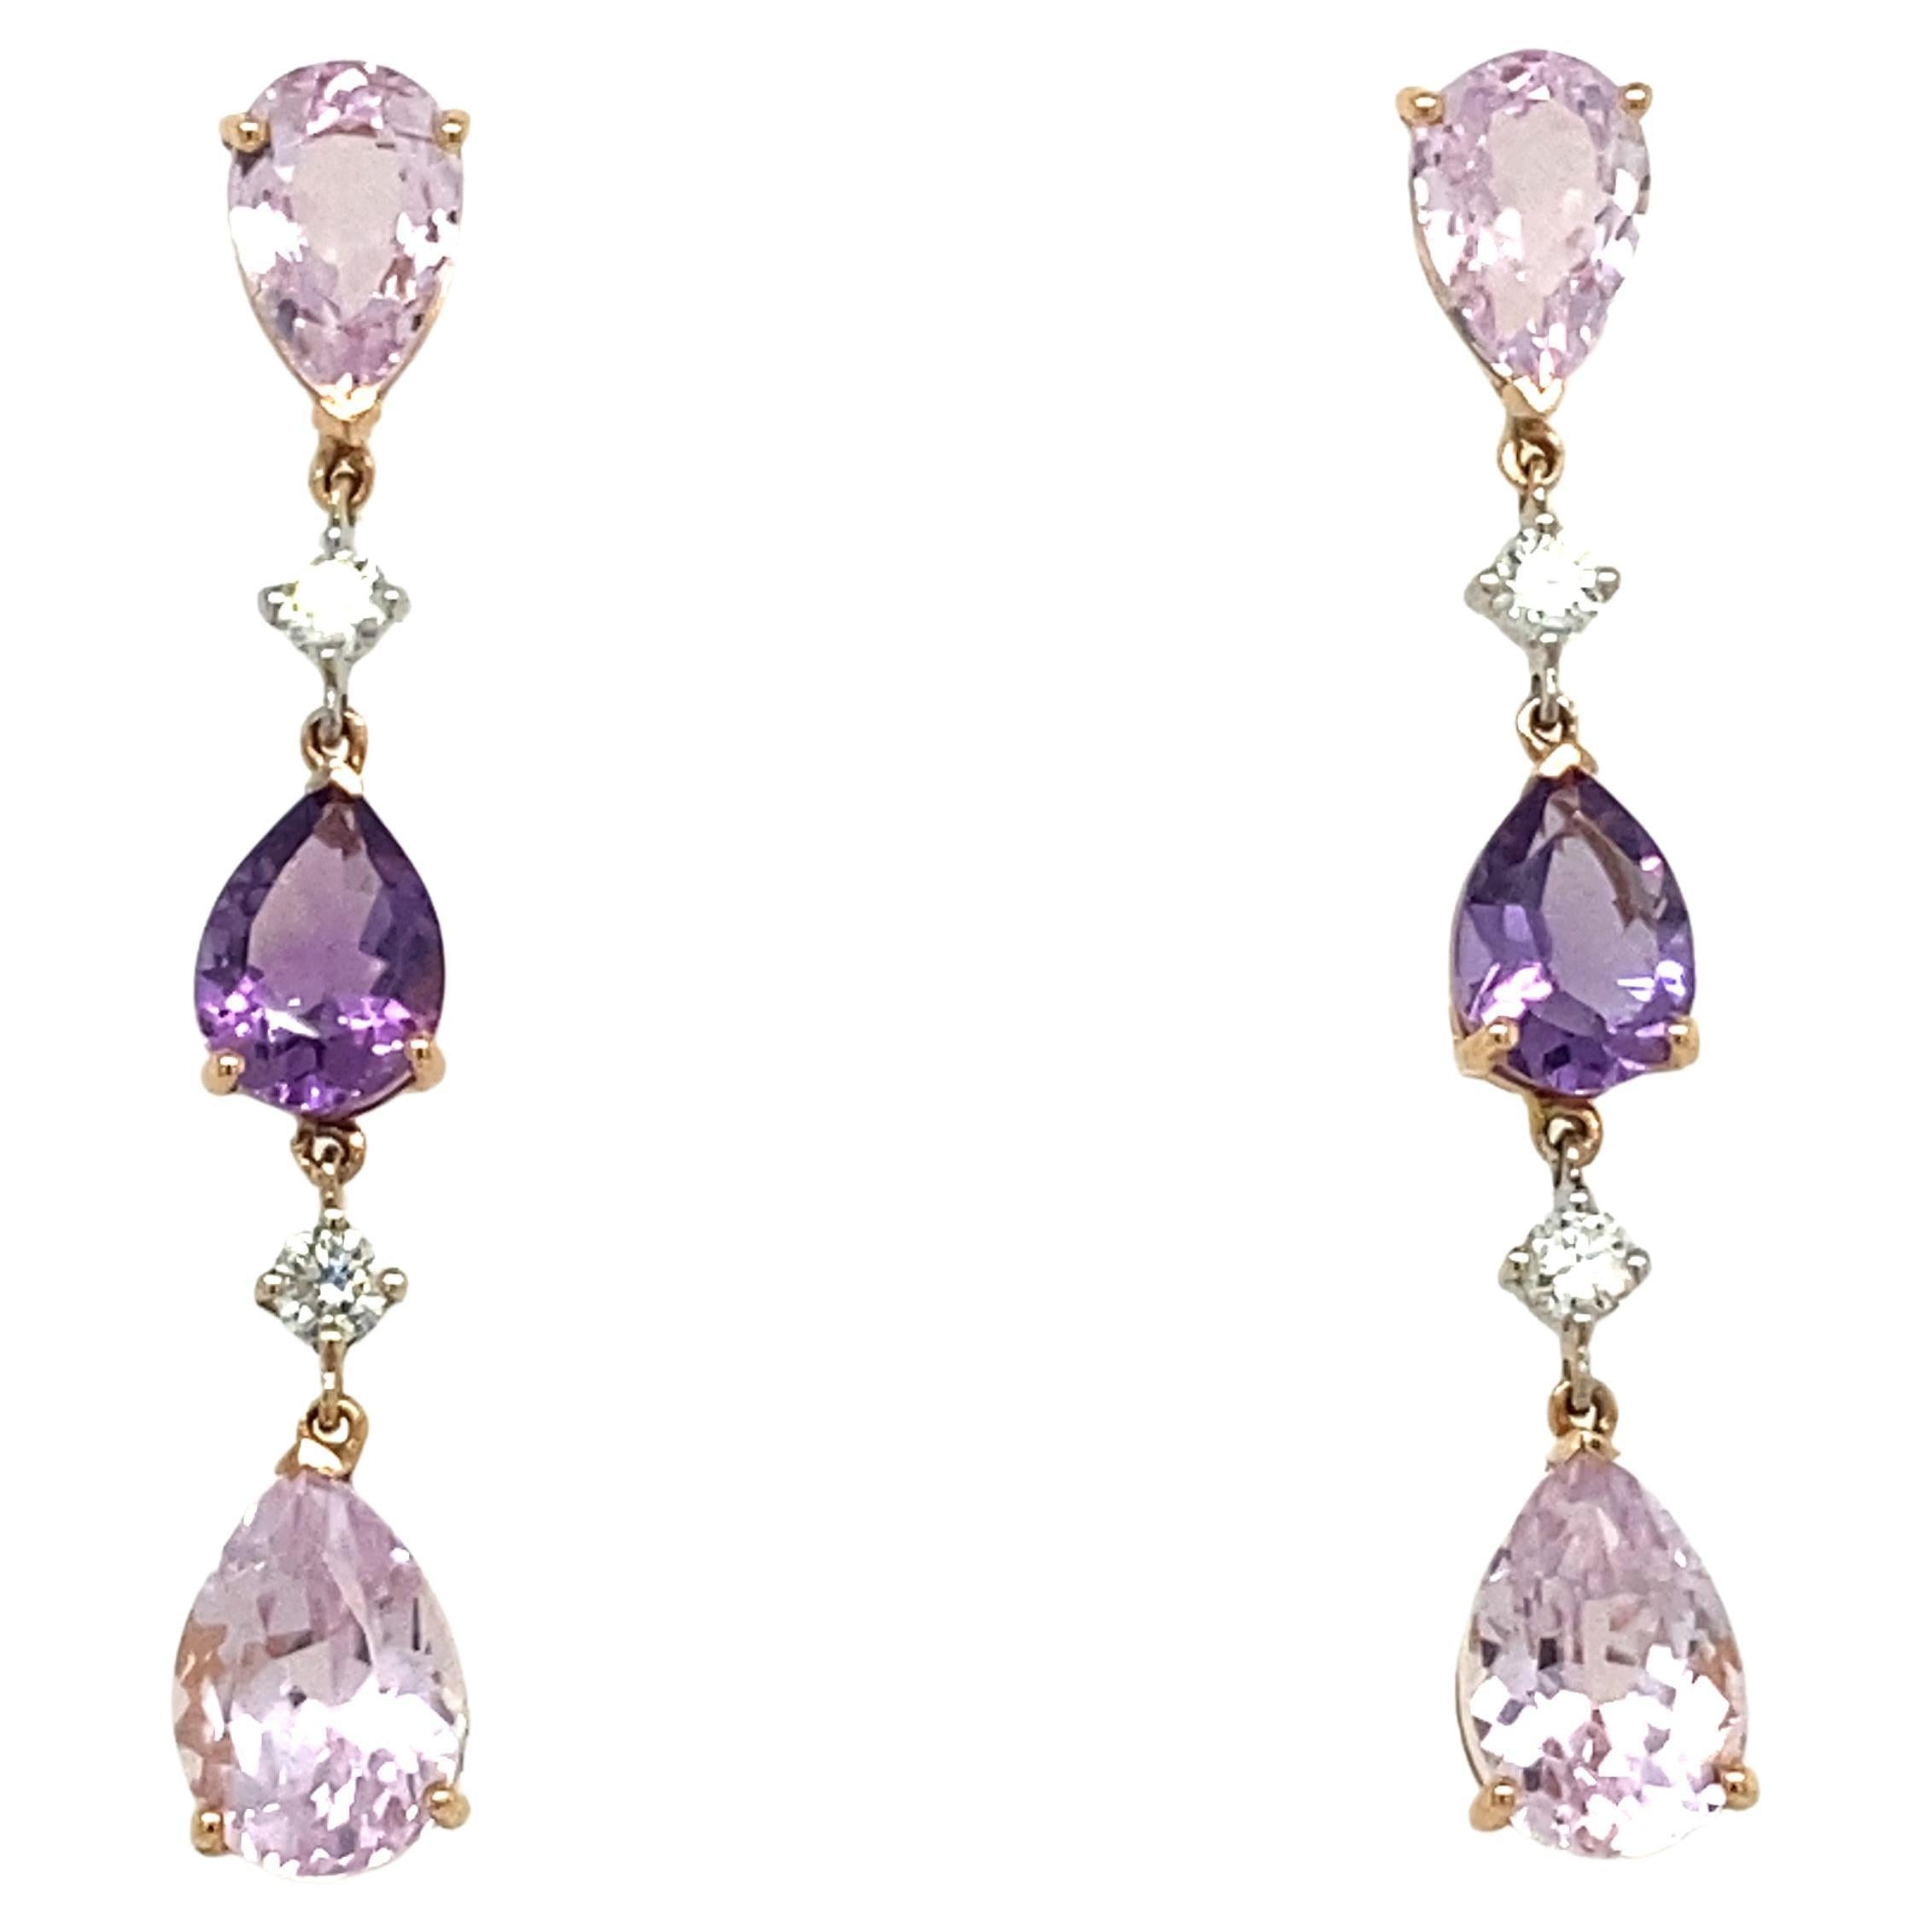 Dangling French Earrings with Diamonds, Amethyst and Kunzites